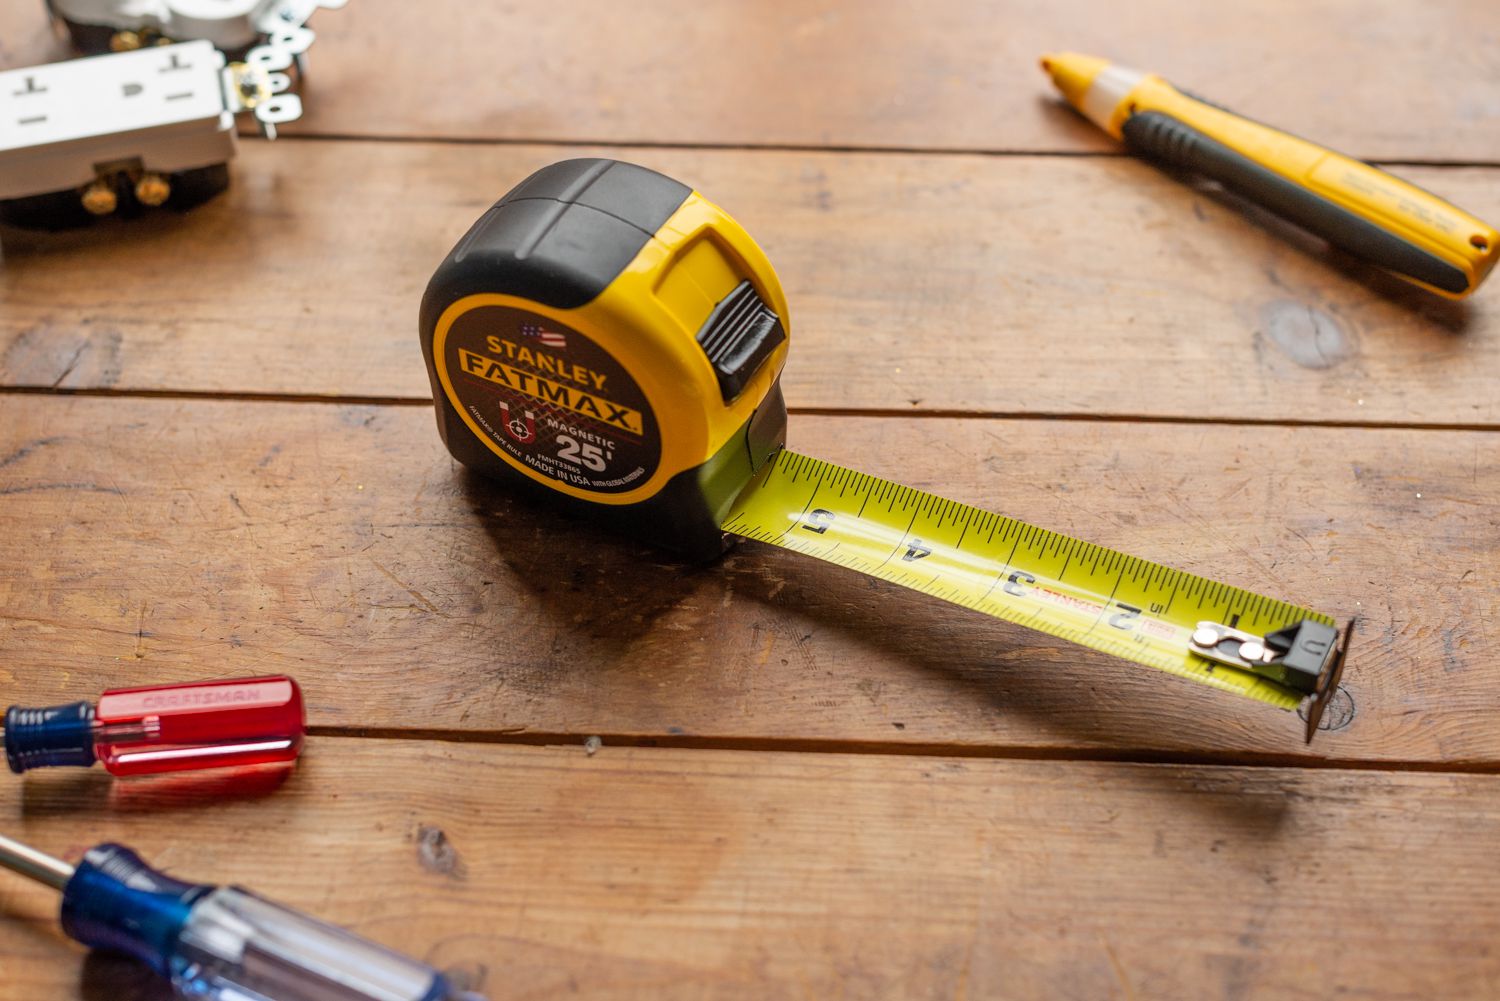 Elementary School Students Score Better Than Adults on This General Knowledge Quiz Tape Measure